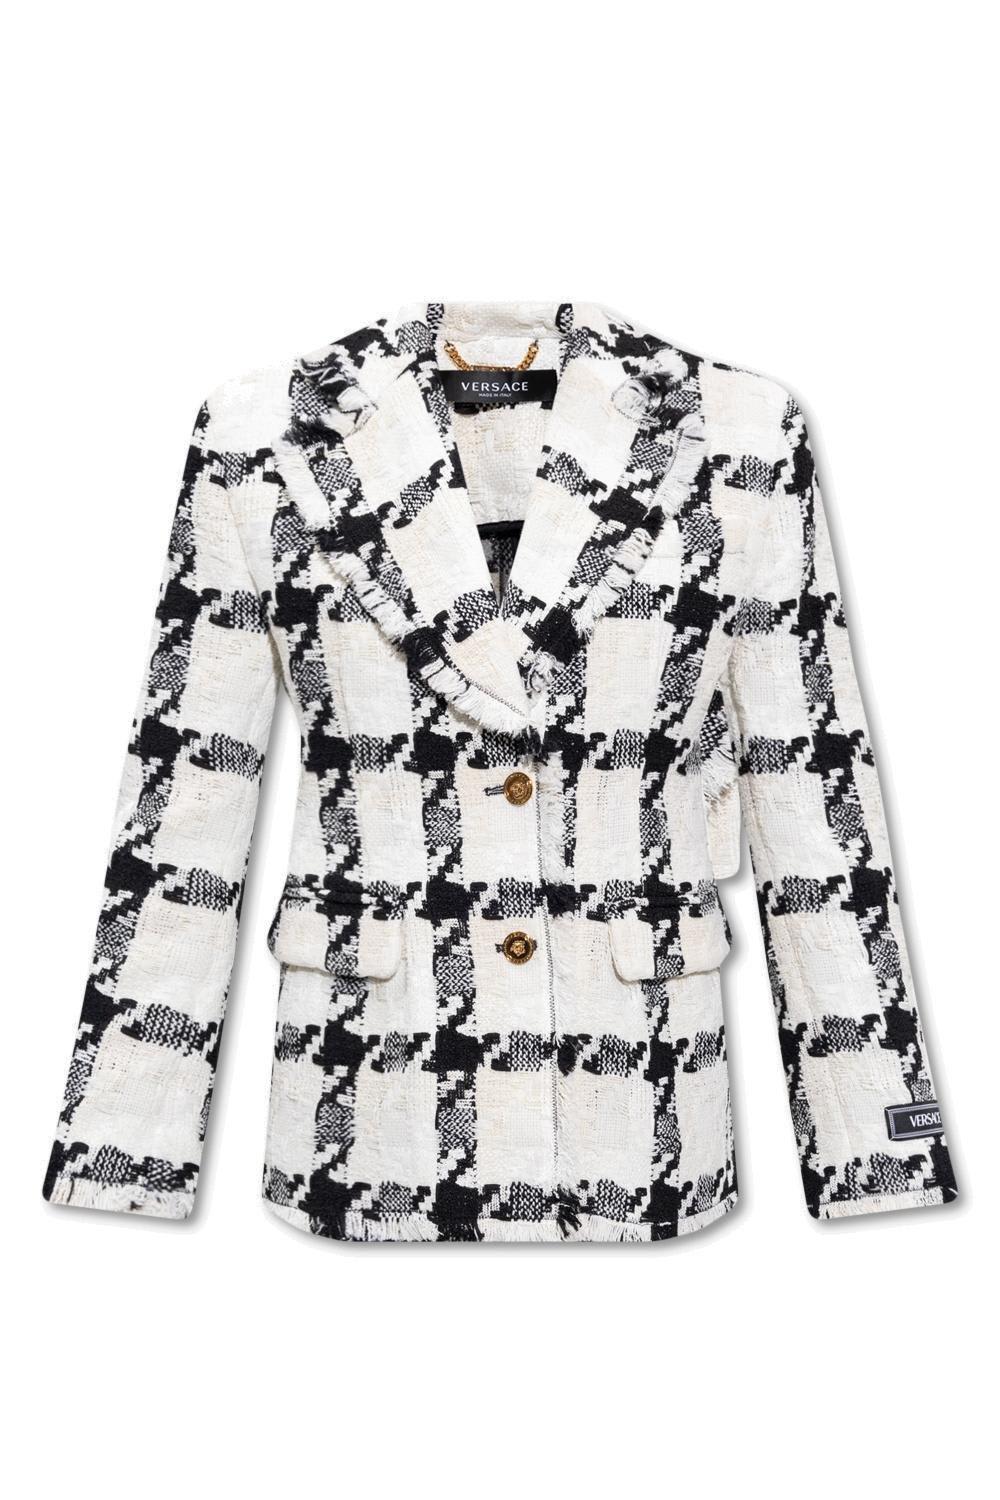 Versace Single-breasted Houndstooth Patterned Blazer